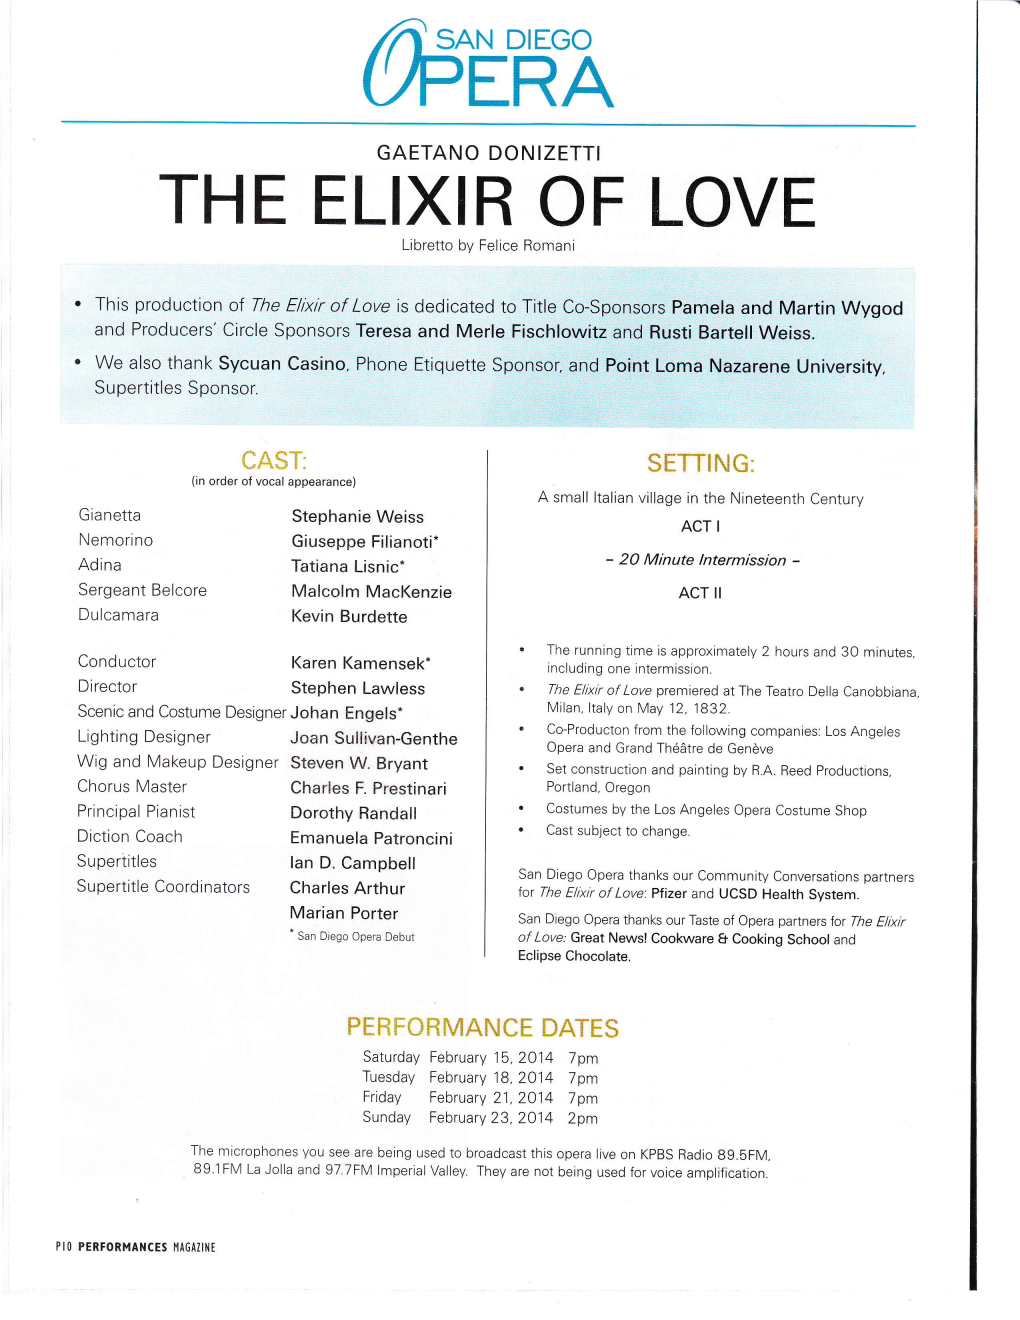 The Elixir of Love and Otello for Los Angeles Opera